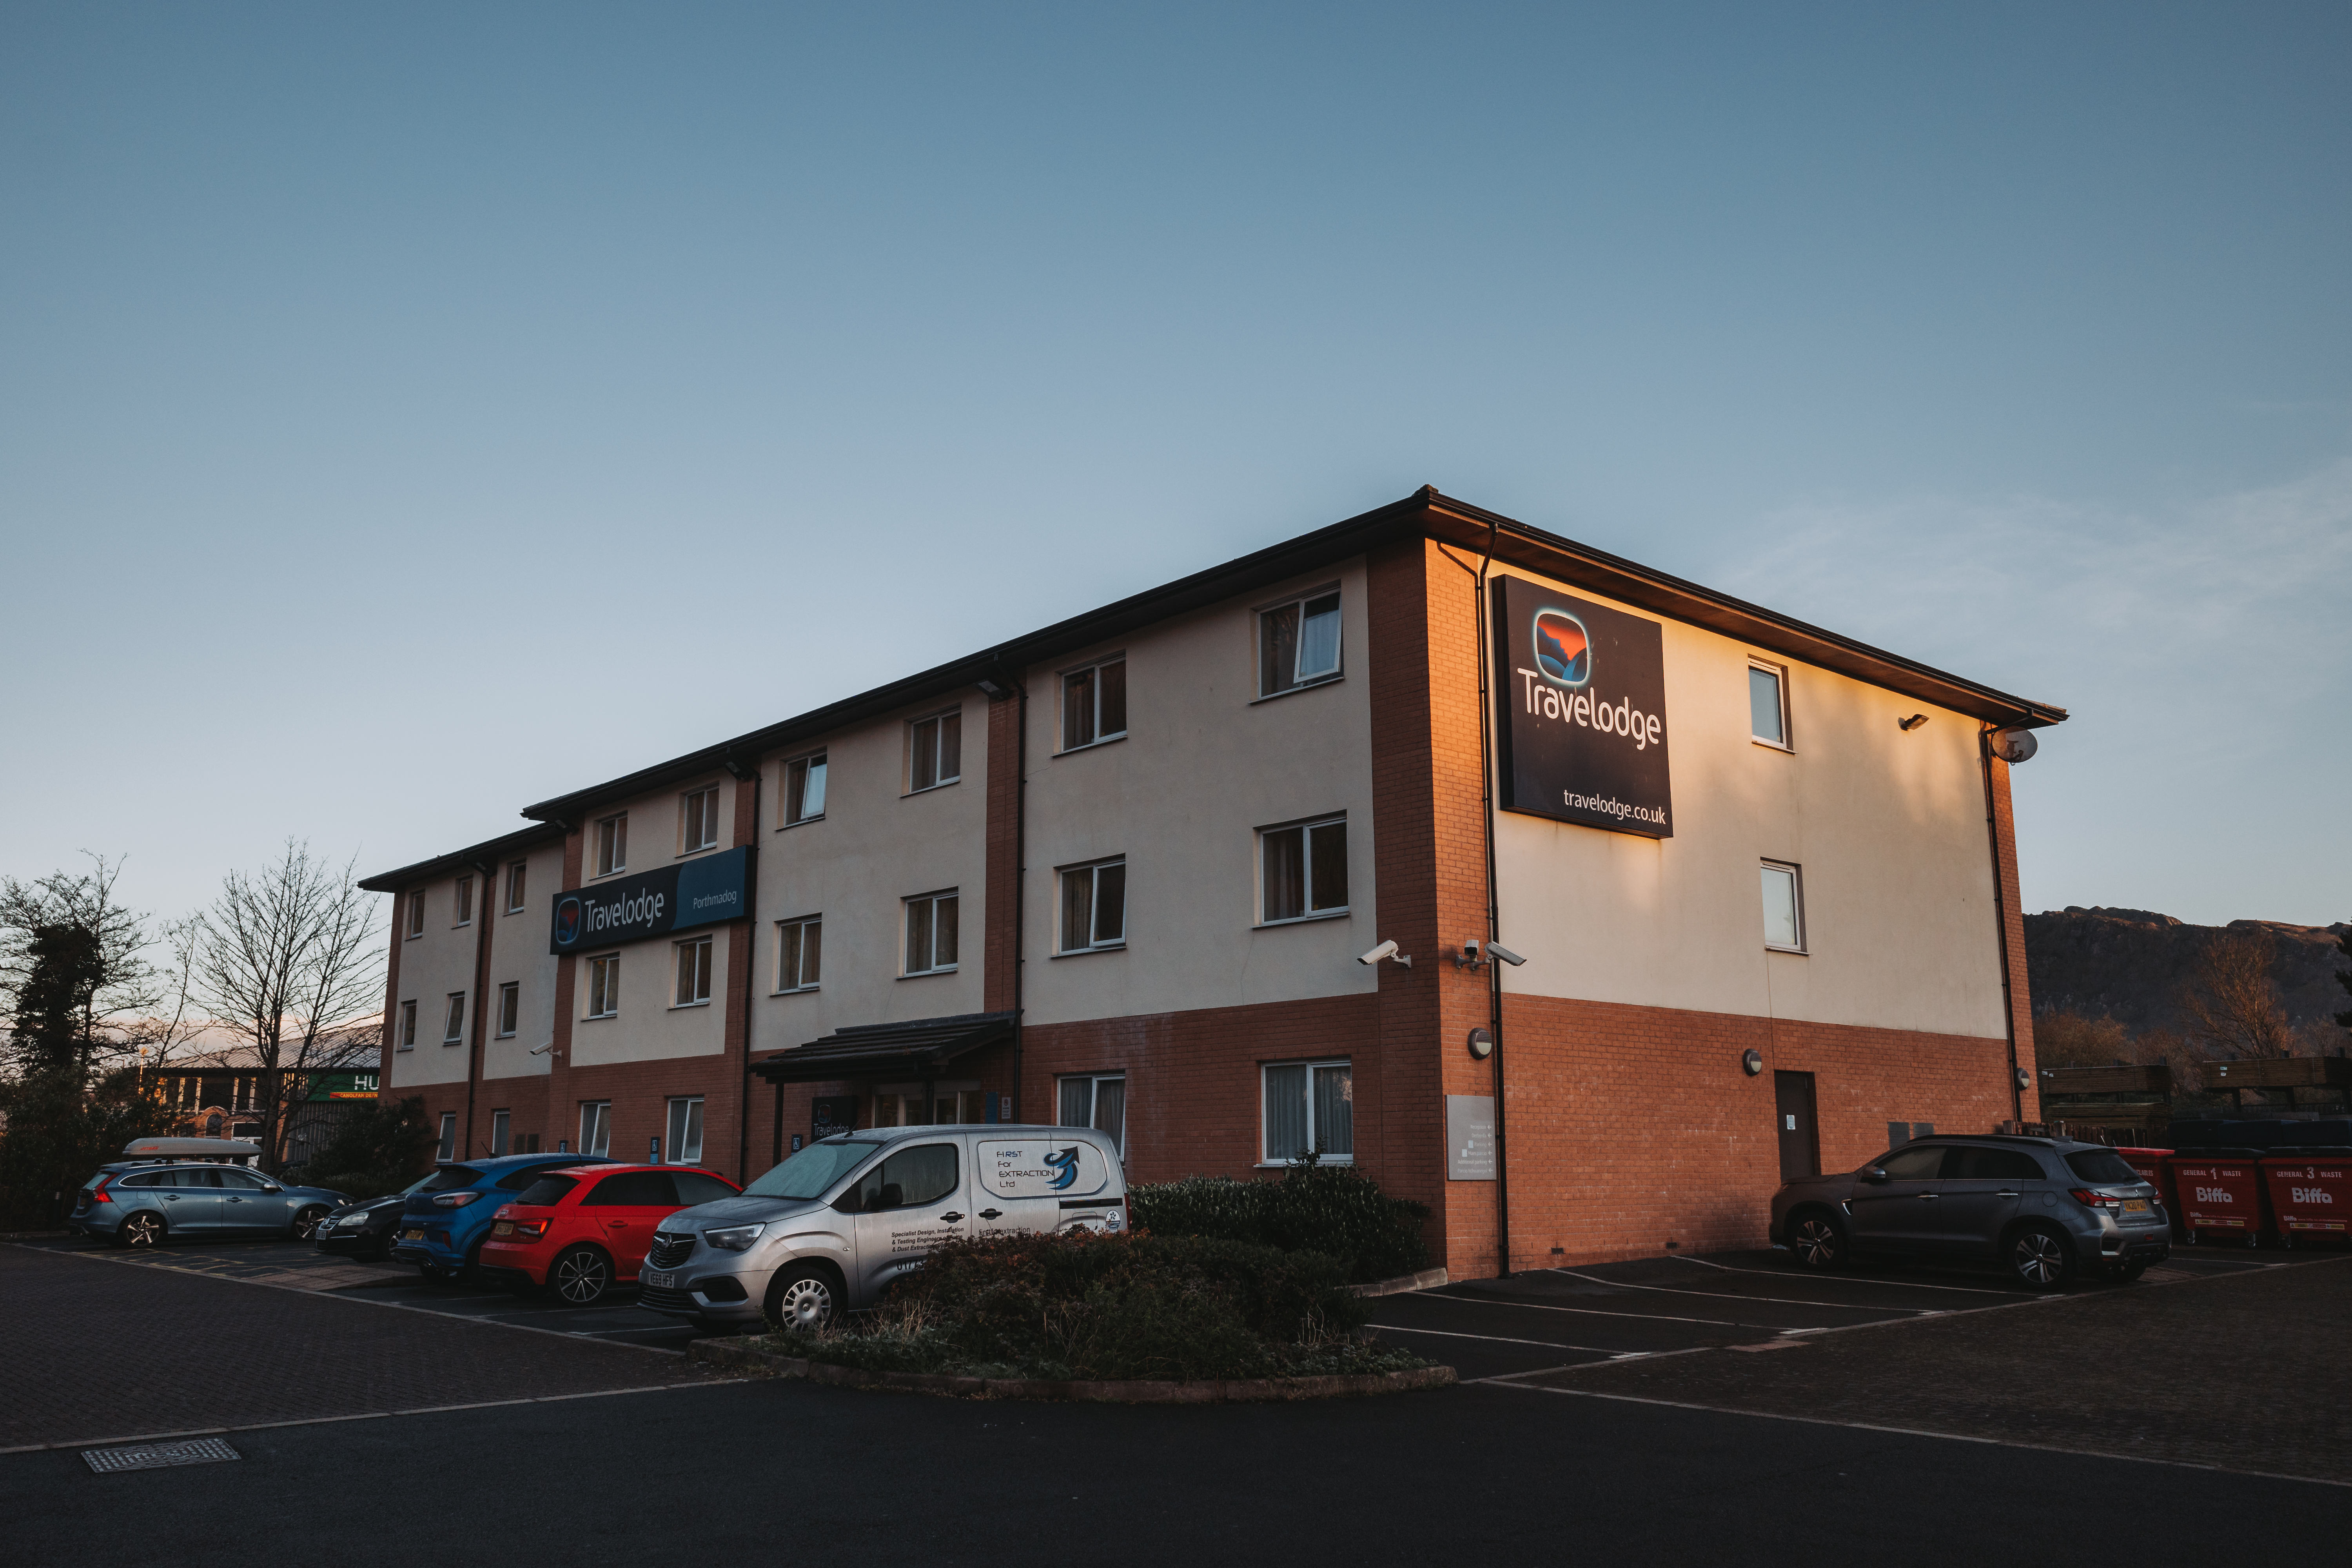 Picture of a place: Travelodge Porthmadog